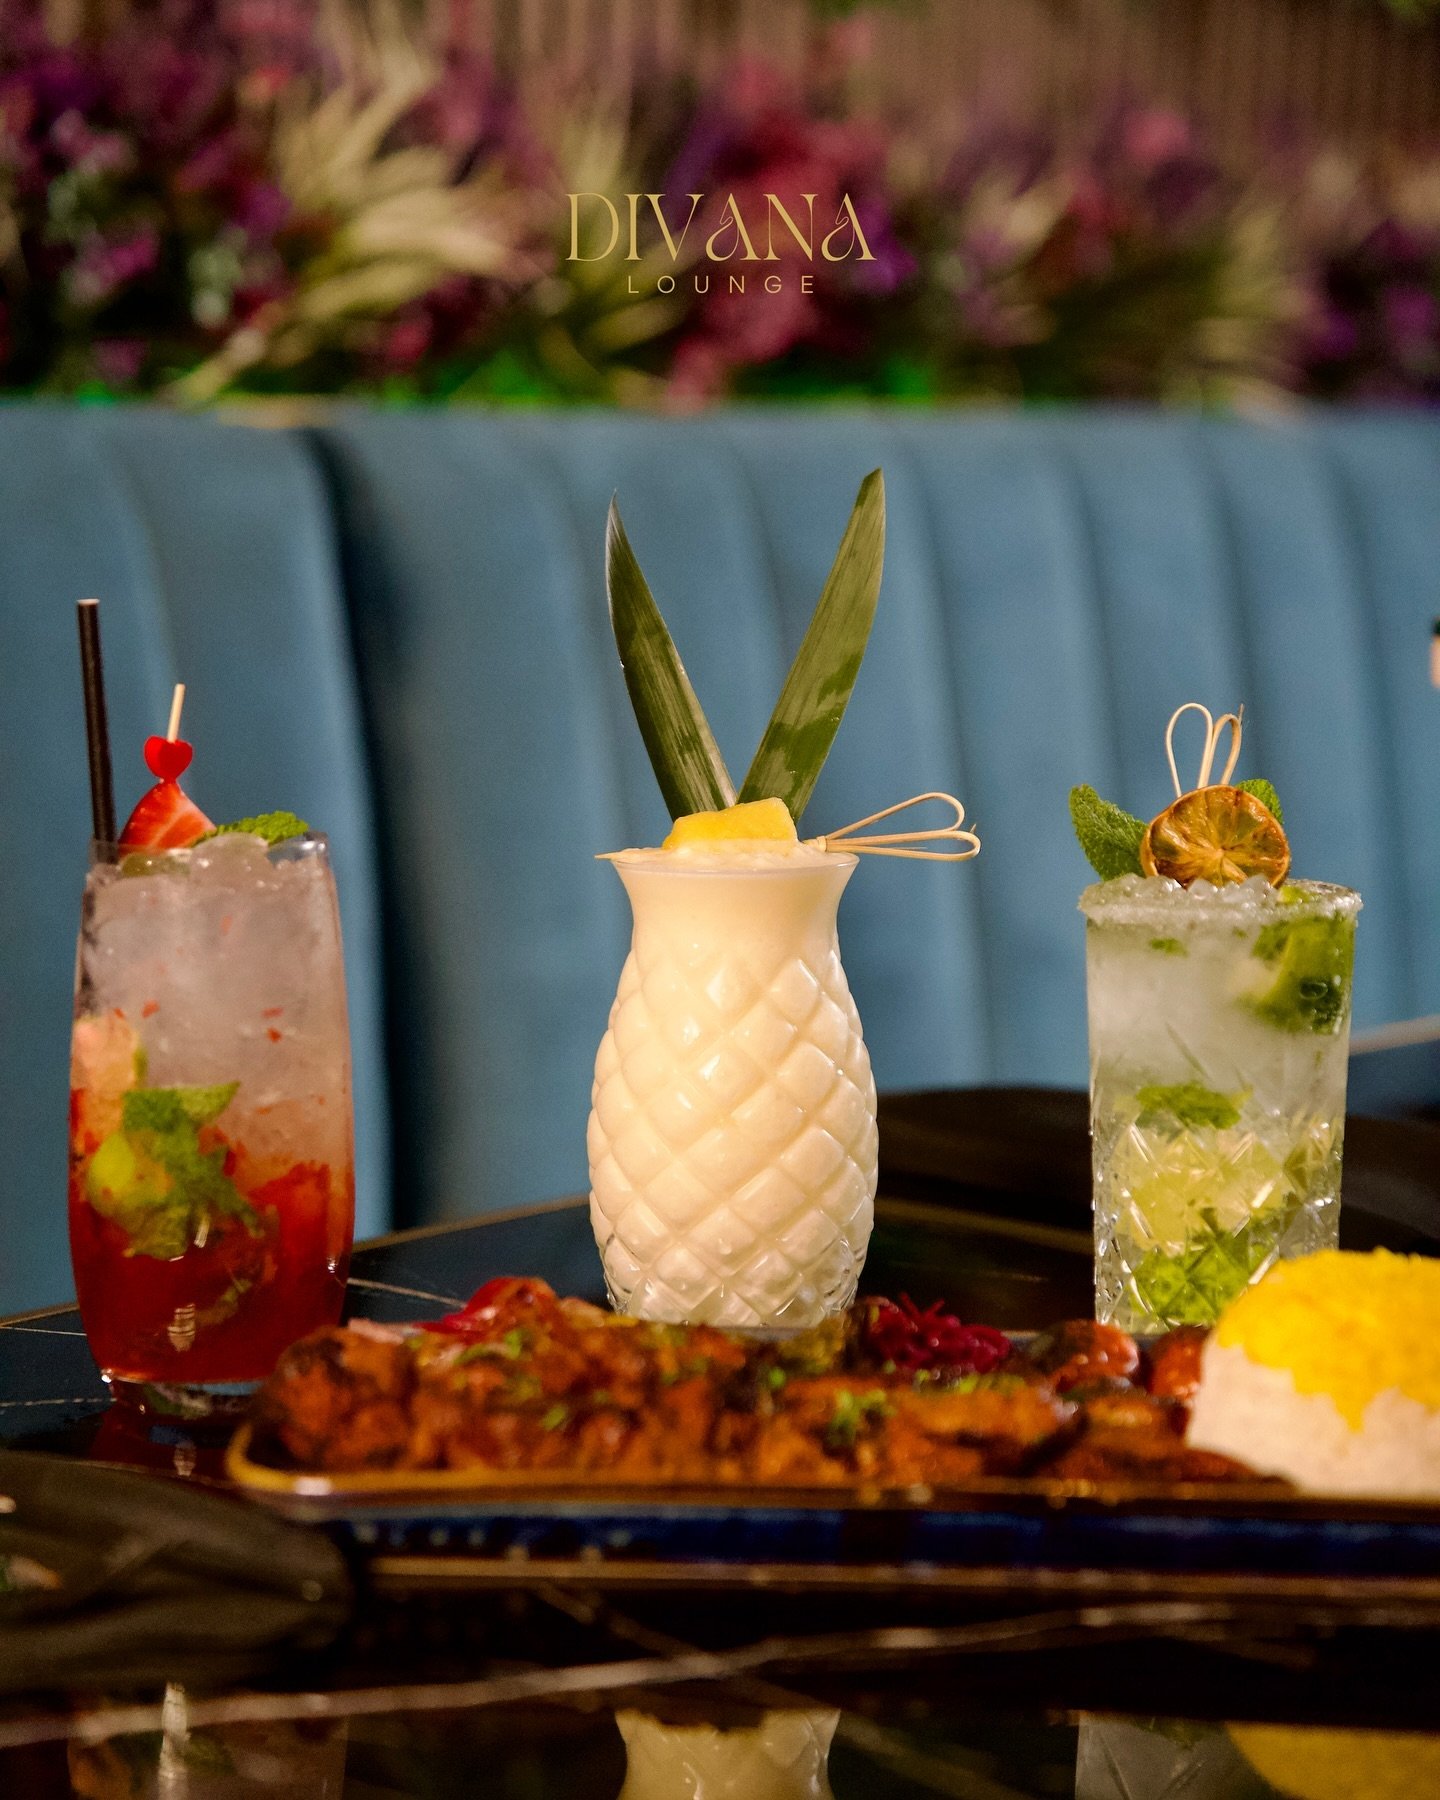 MOCKTAIL MADNESS! 🍹 

As summer is around the corner, we are prepped up with the perfect summer treat with our BANGING MOCKTAILS! 😍

Walk-ins available | Call: 07355049930 

OUR WEBSITE IS LIVE: WWW.DIVANALOUNGE.CO.UK 💻

Opening Times ⏰:

SUN - TH